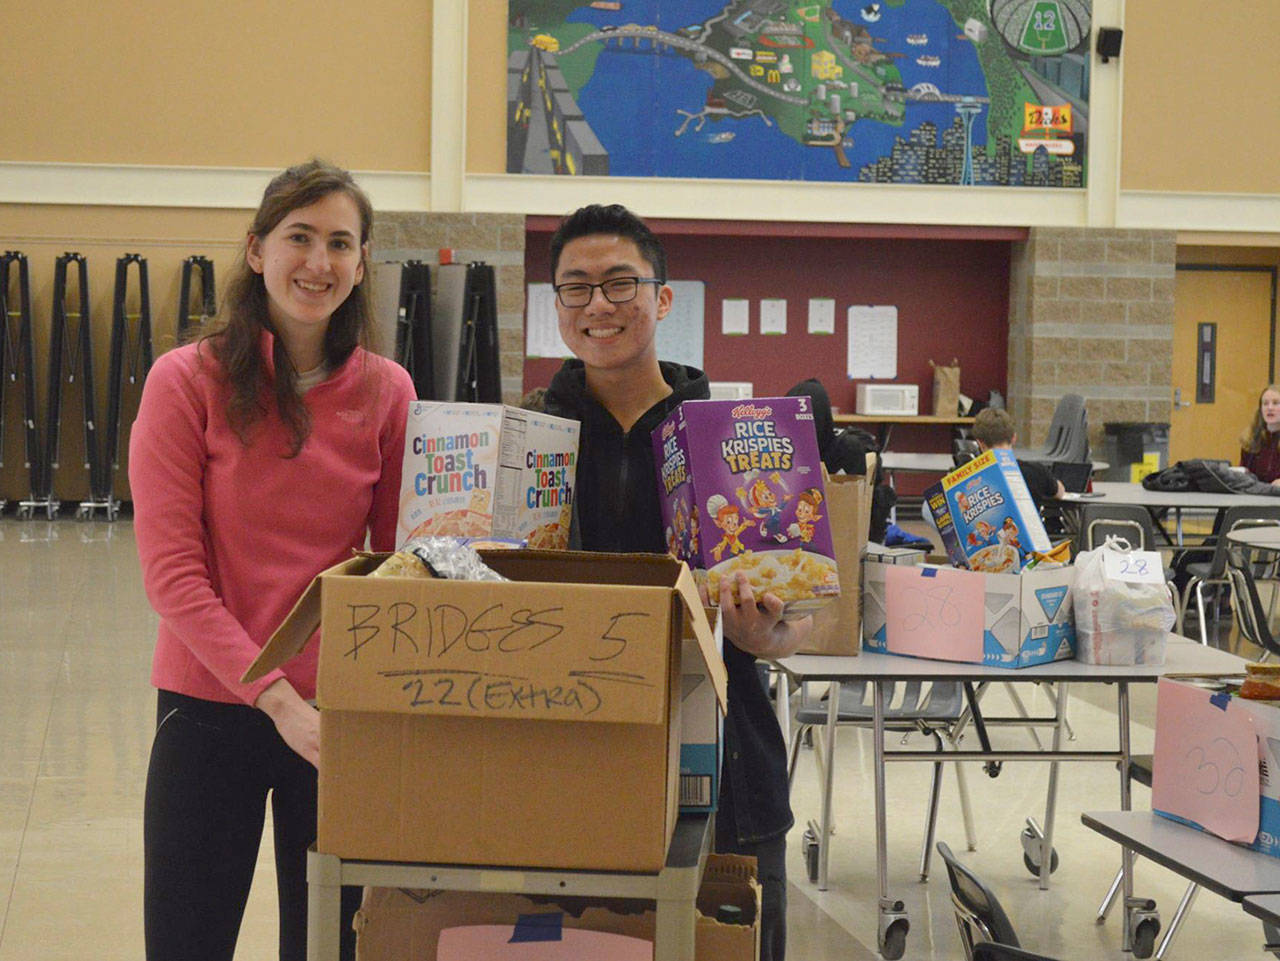 Mercer Island High School collected items to benefit 35 families identified through the Mercer Island Youth and Family Services Foundation. Students were busy on Dec. 6, moving the food into the commons. Photo courtesy of the Mercer Island School District